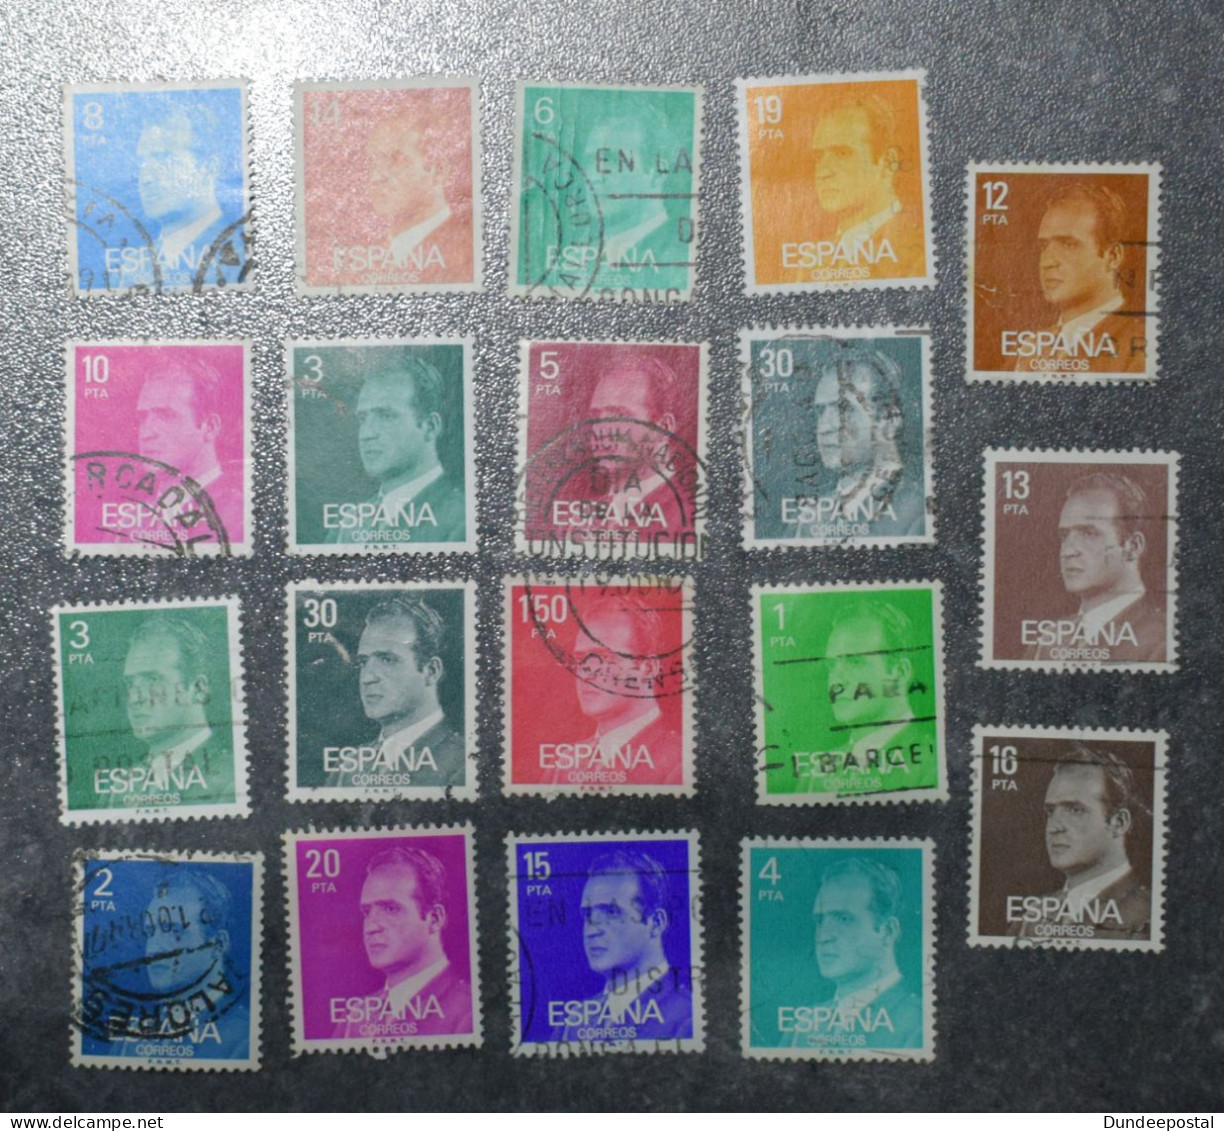 SPAIN  STAMPS Coms     1976 - 80    ~~L@@K~~ - Used Stamps